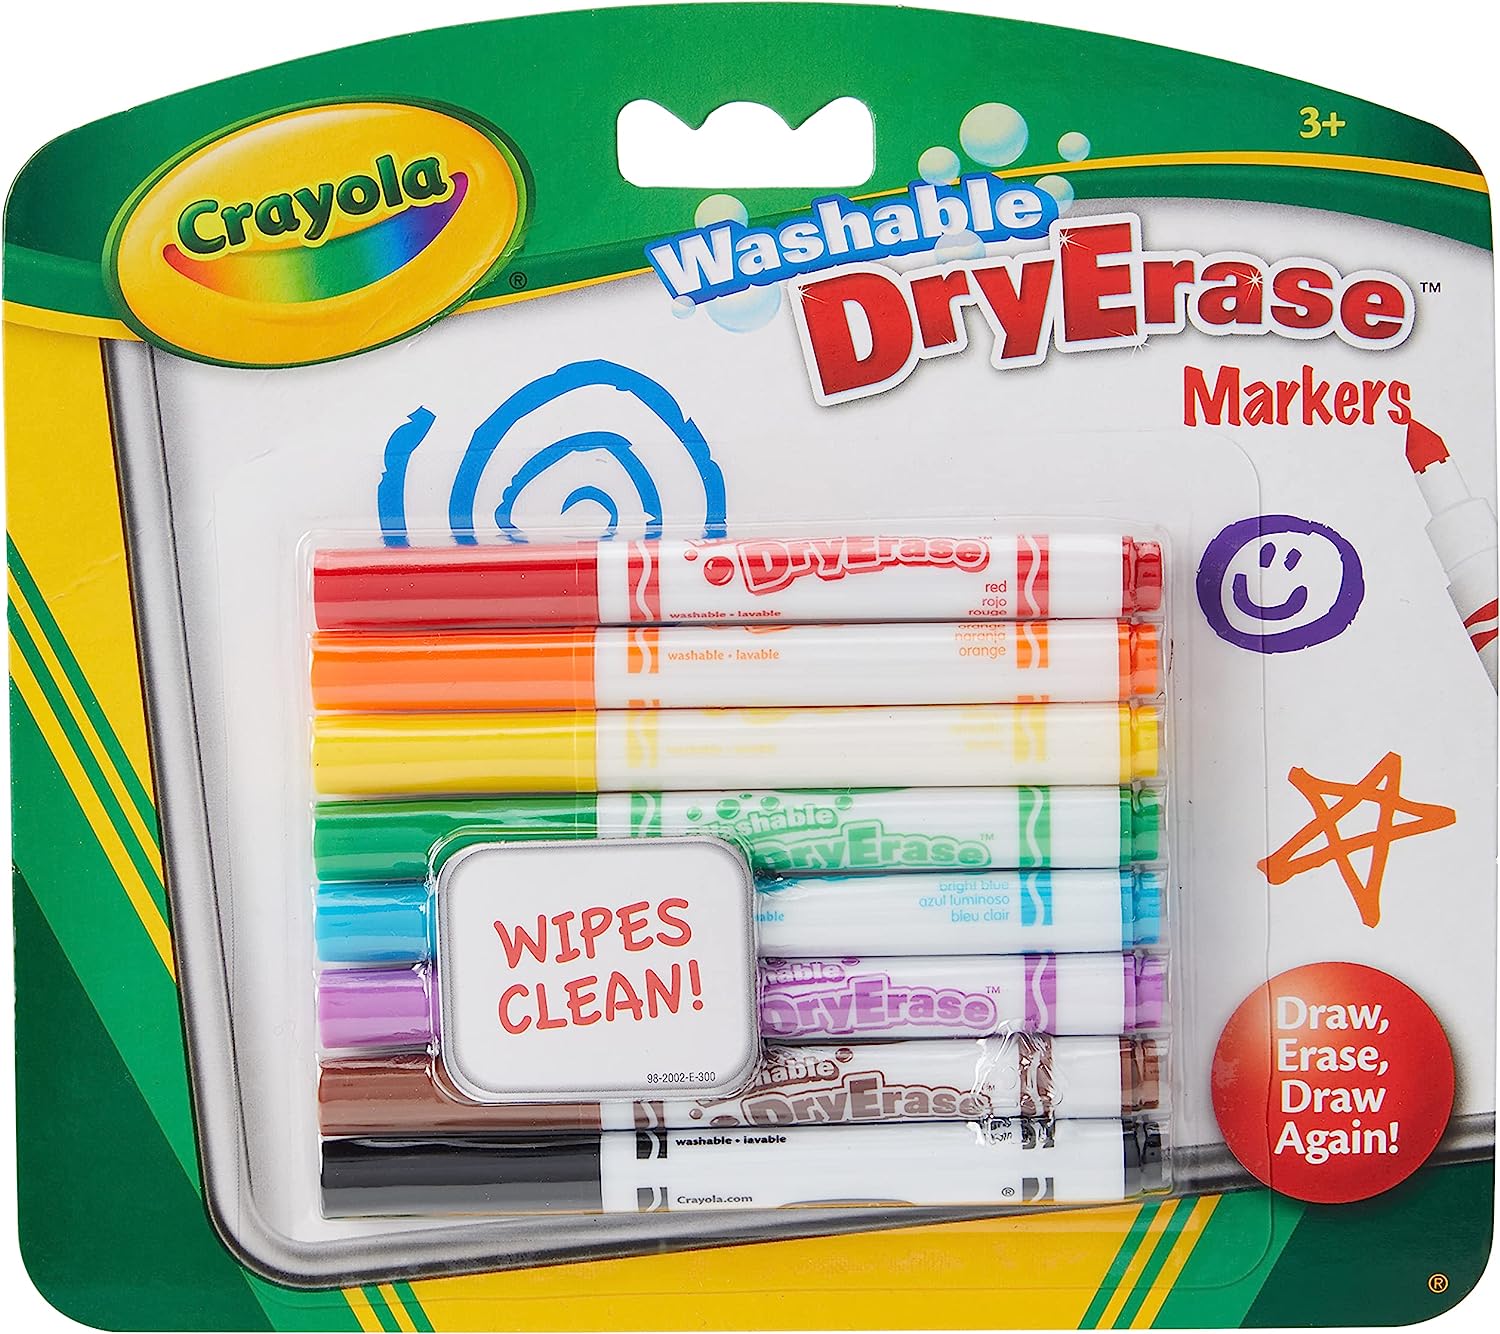 8 WASHABLE DRY ERASE MARKERS